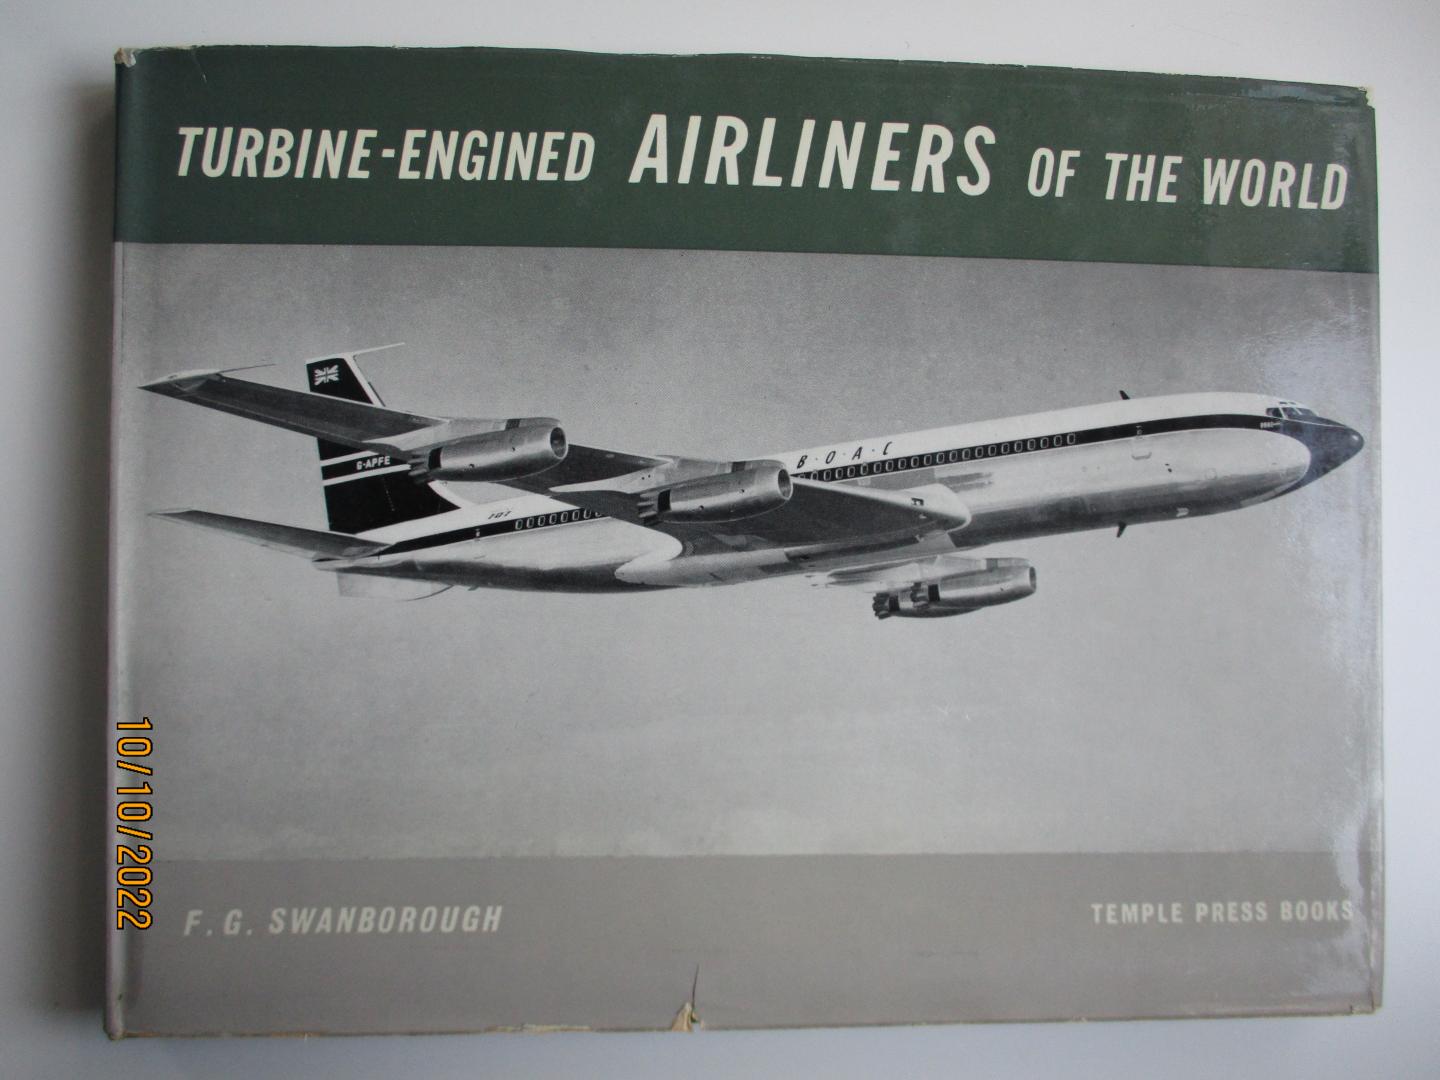 F.G. Swanborough - Turbine-engined airliners of the world